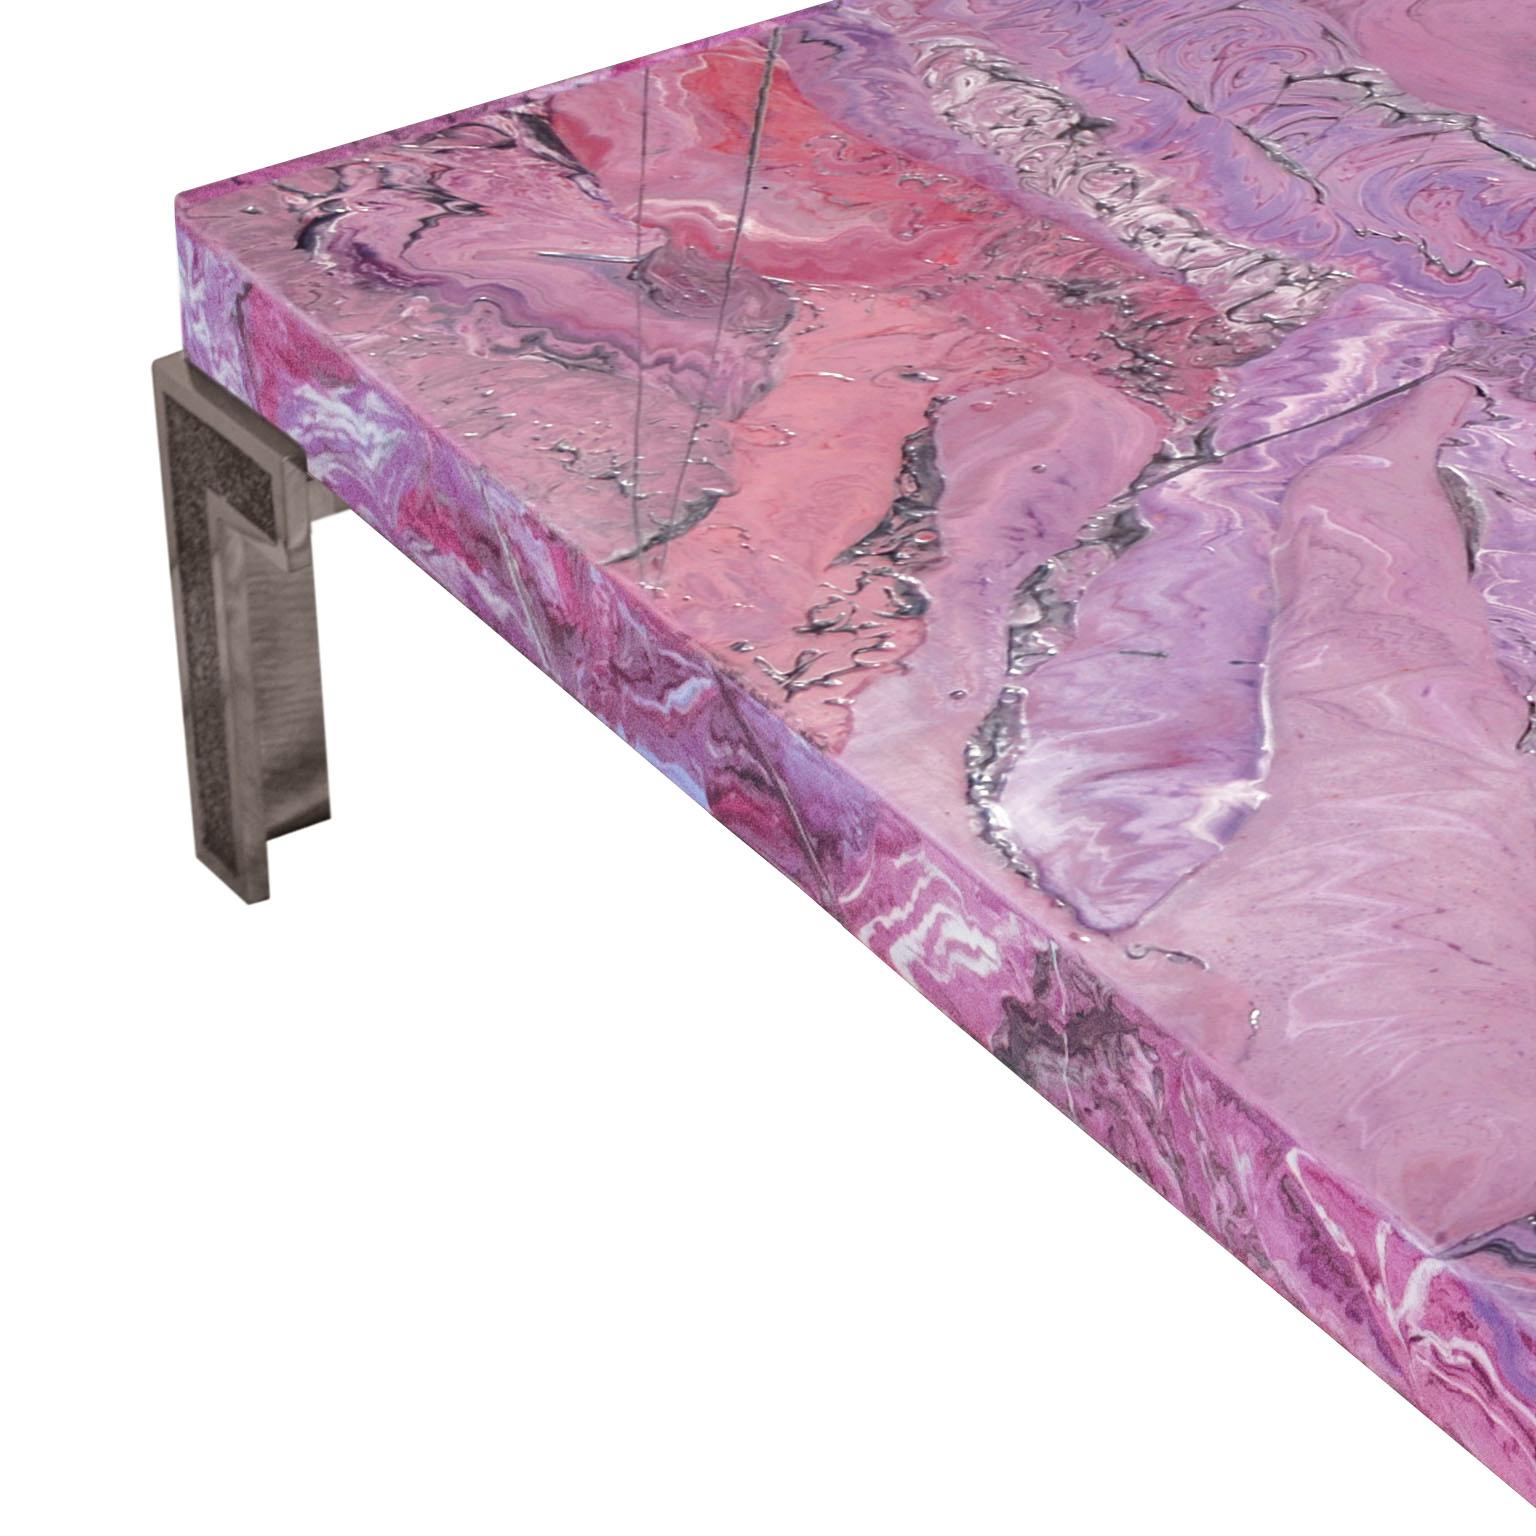 Hand-Crafted Coffee Table Ametista Marbled Scagliola Decoration Texturized Metal Feet